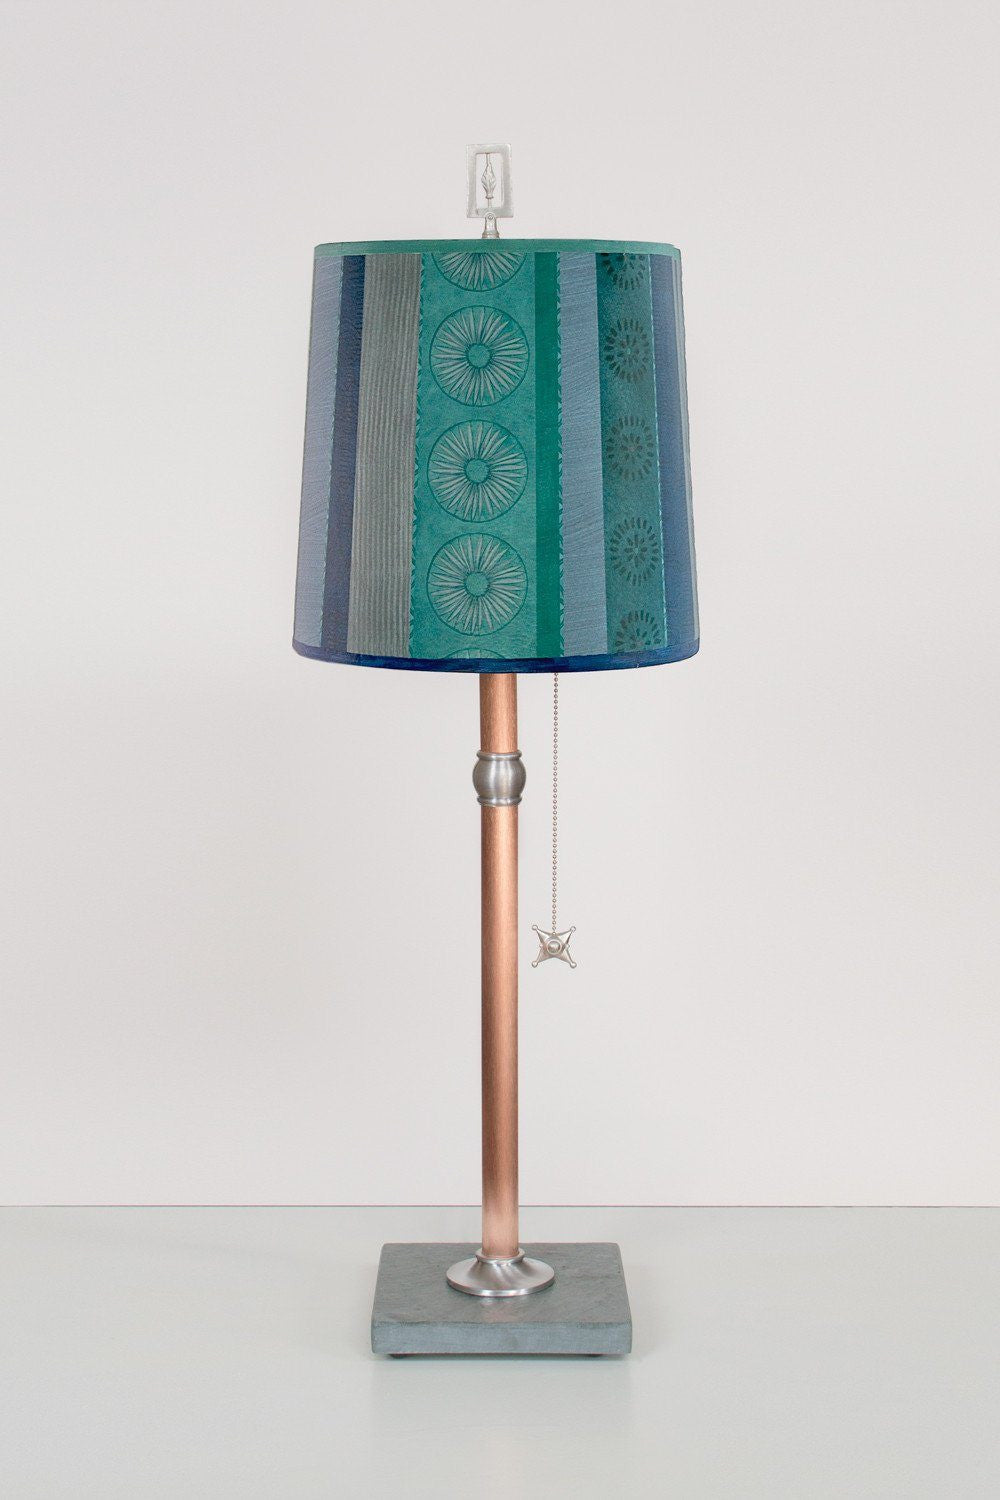 Janna Ugone &amp; Co Table Lamps Copper Table Lamp with Medium Drum Shade in Serape Waters